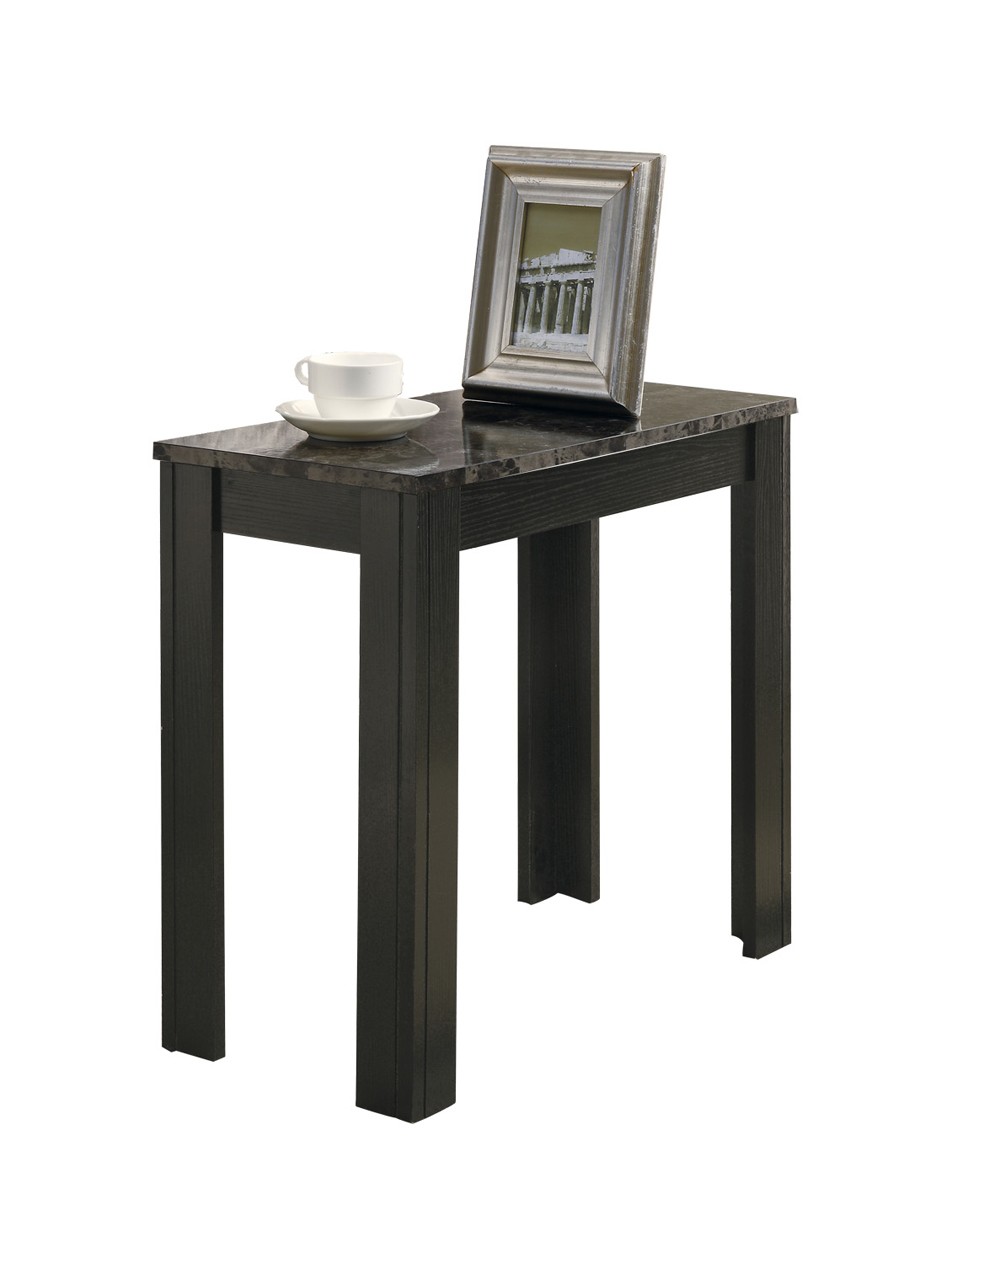 vinyl dining room chair covers black marble accent table faux tables clear glass coffee white console garden storage solutions cream colored nightstand outside patio set asian